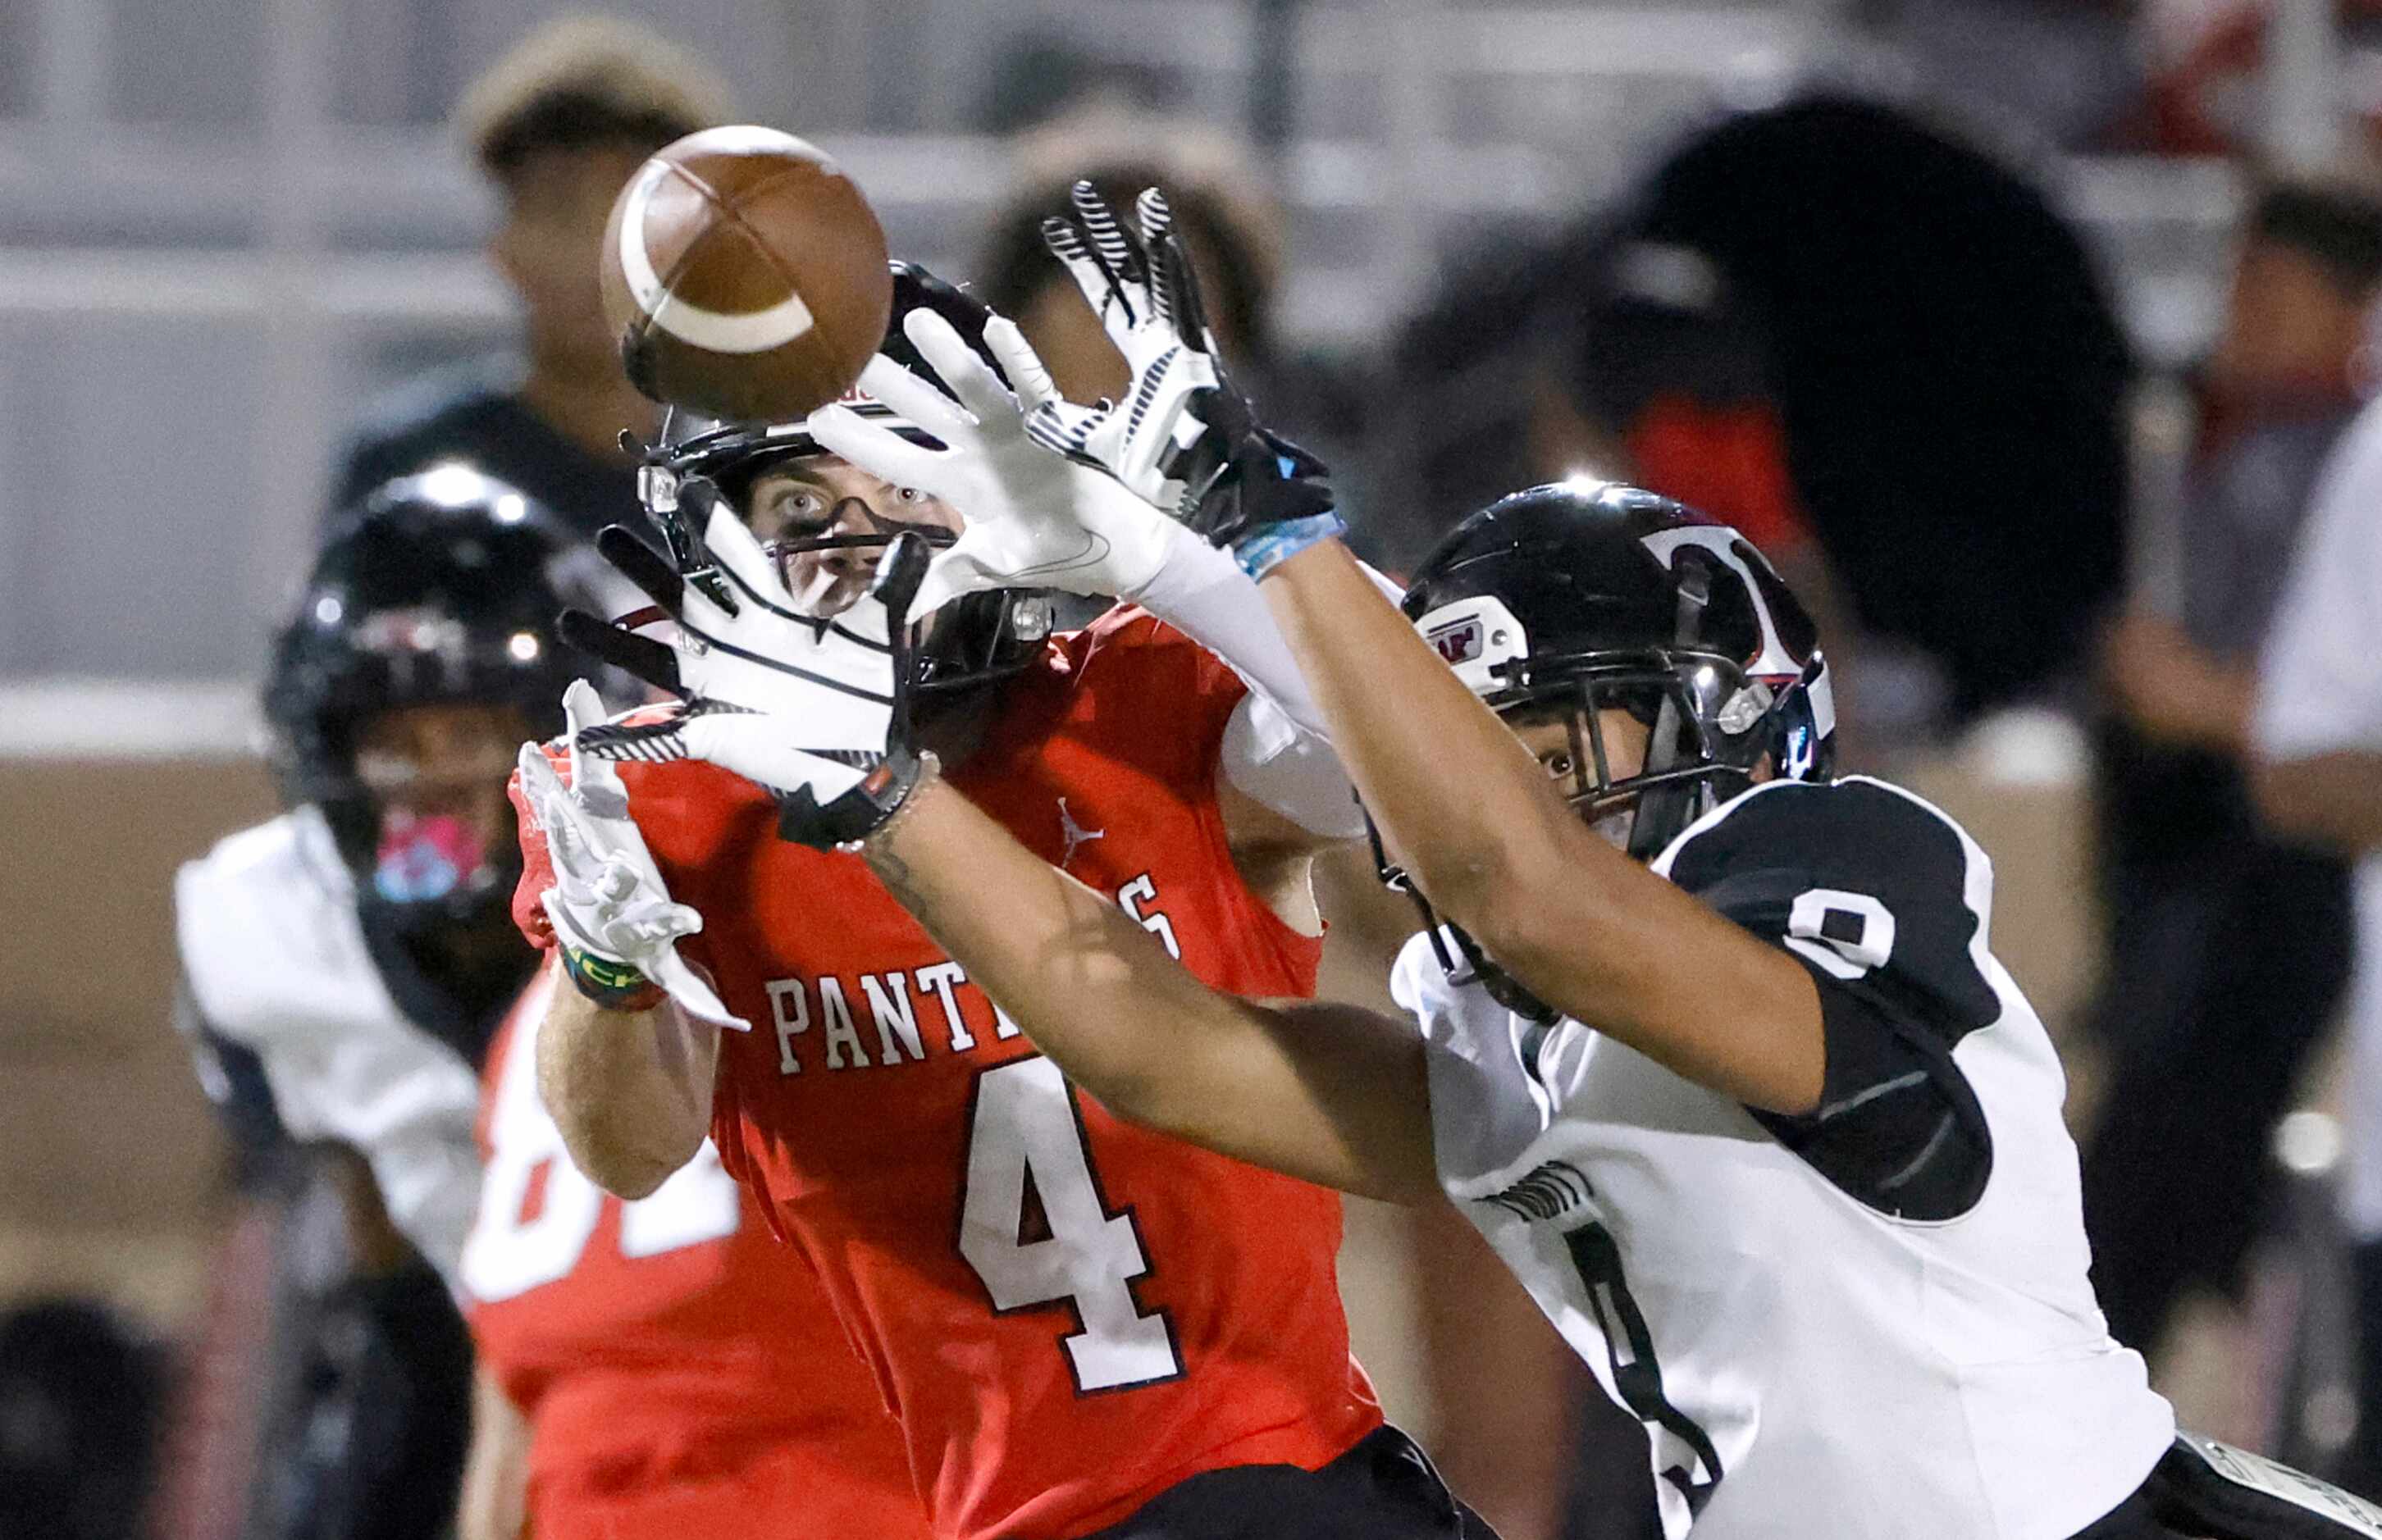 Euless Trinity defender Tovo Asaeli, right, breaks up a pass intended for Colleyville...